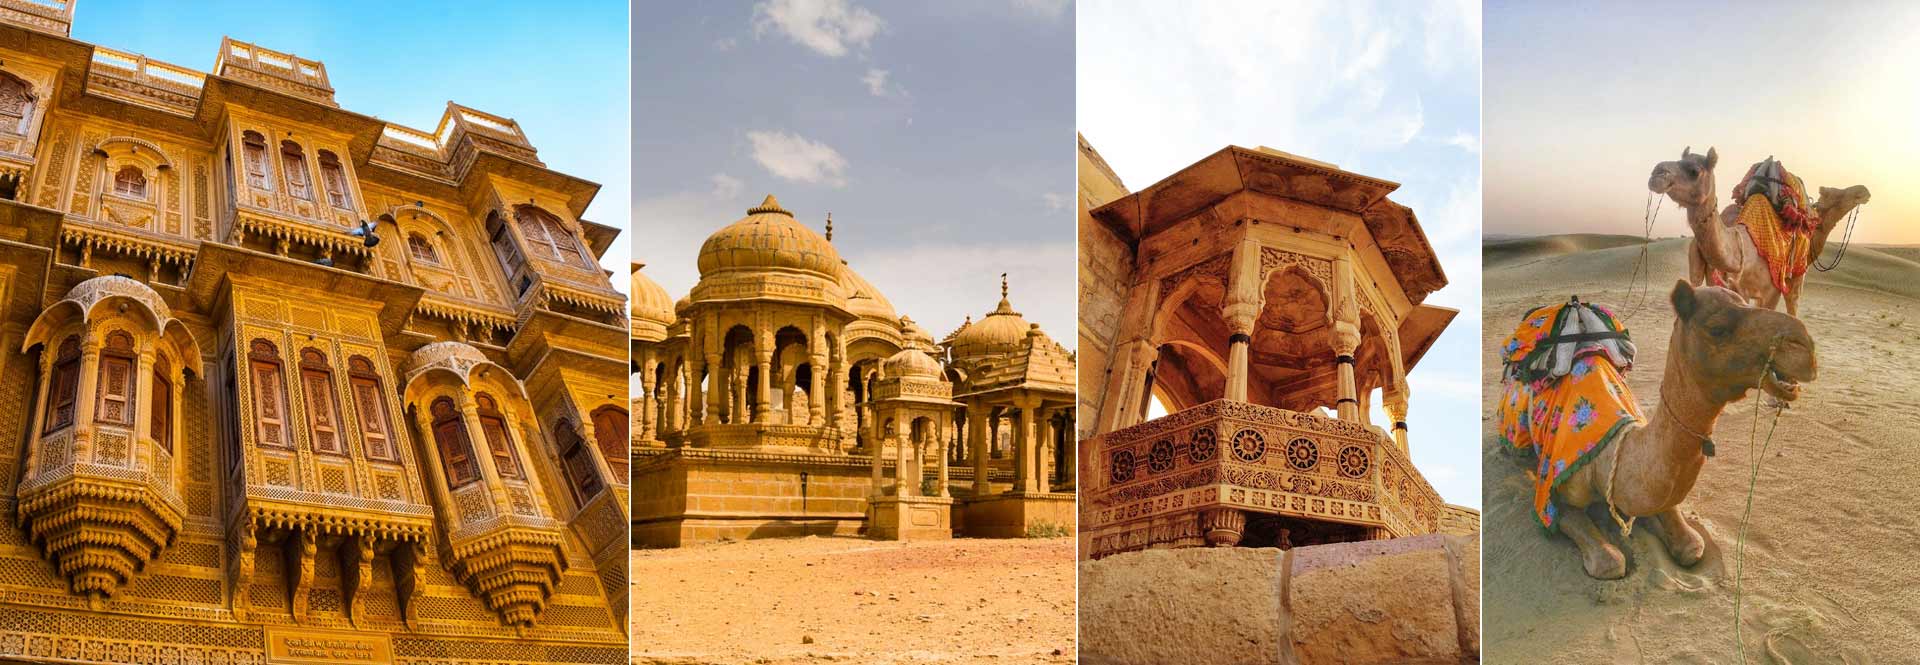 One Night 2 Days Jaisalmer Tour Travel Holiday Vacation Trip Package